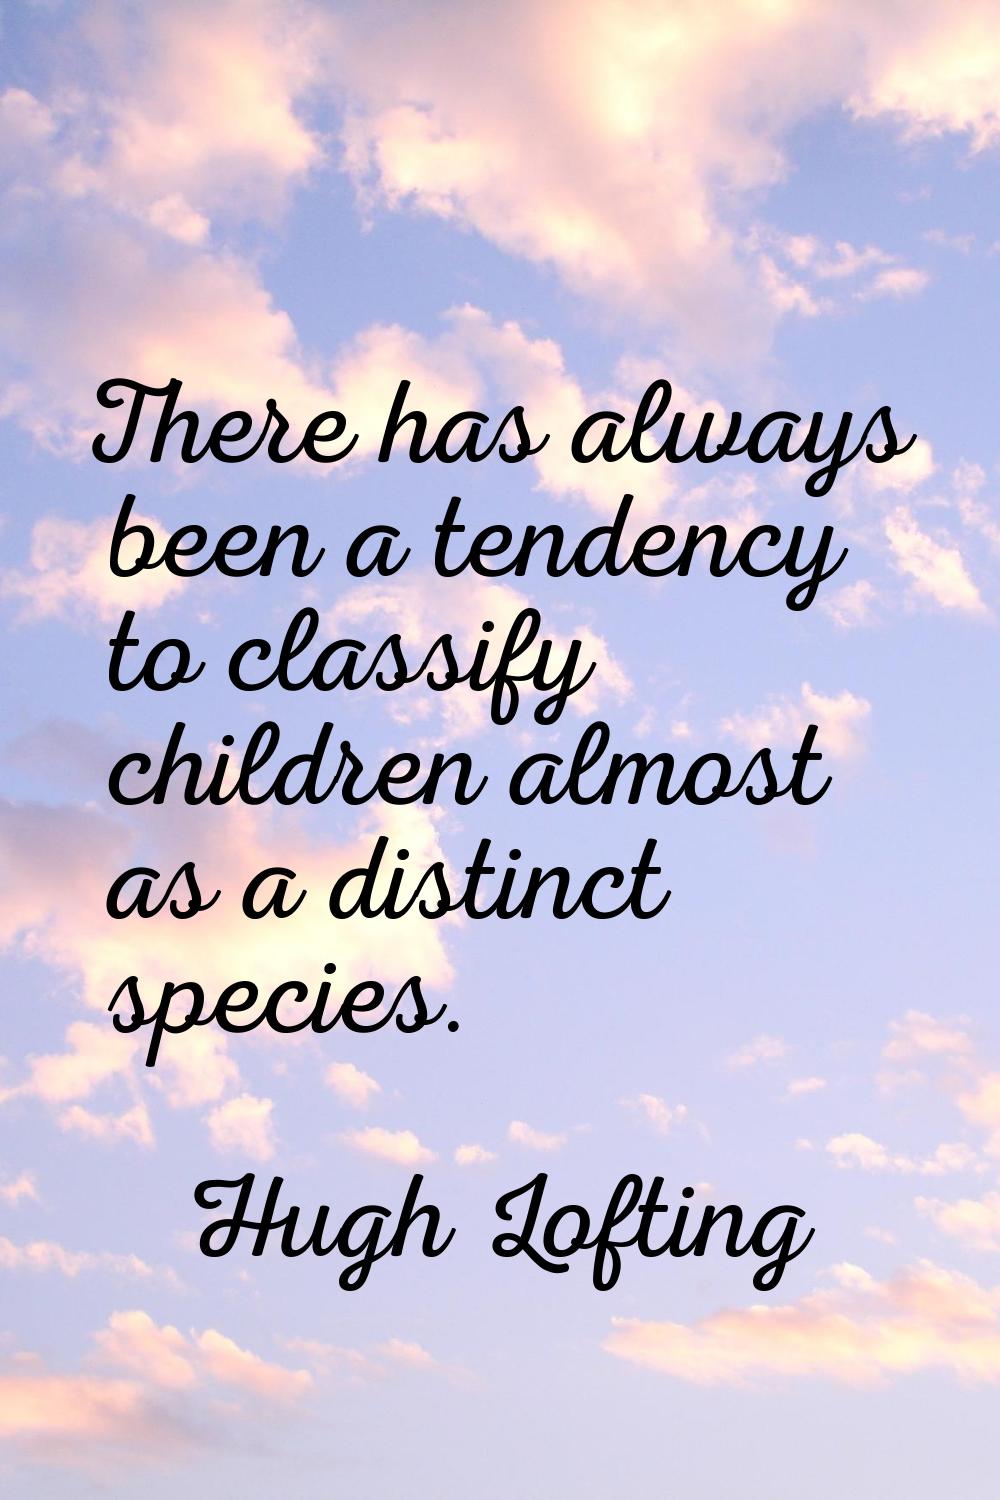 There has always been a tendency to classify children almost as a distinct species.